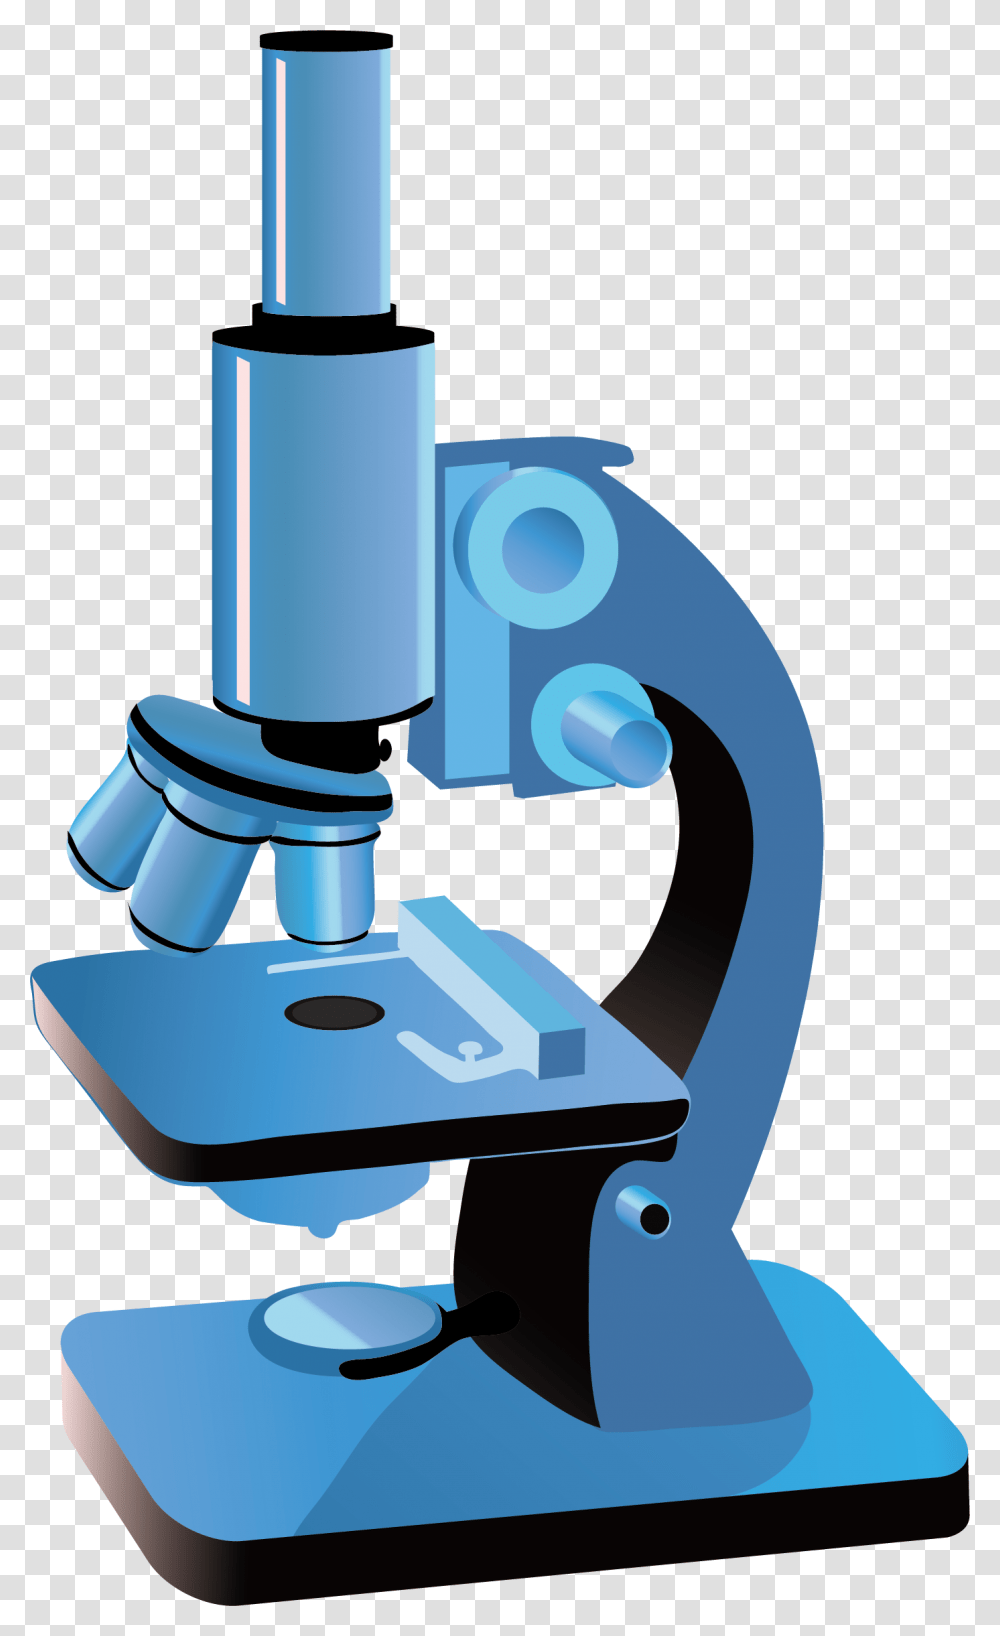 Microscope Clipart Microscope Clipart, Sink Faucet Transparent Png